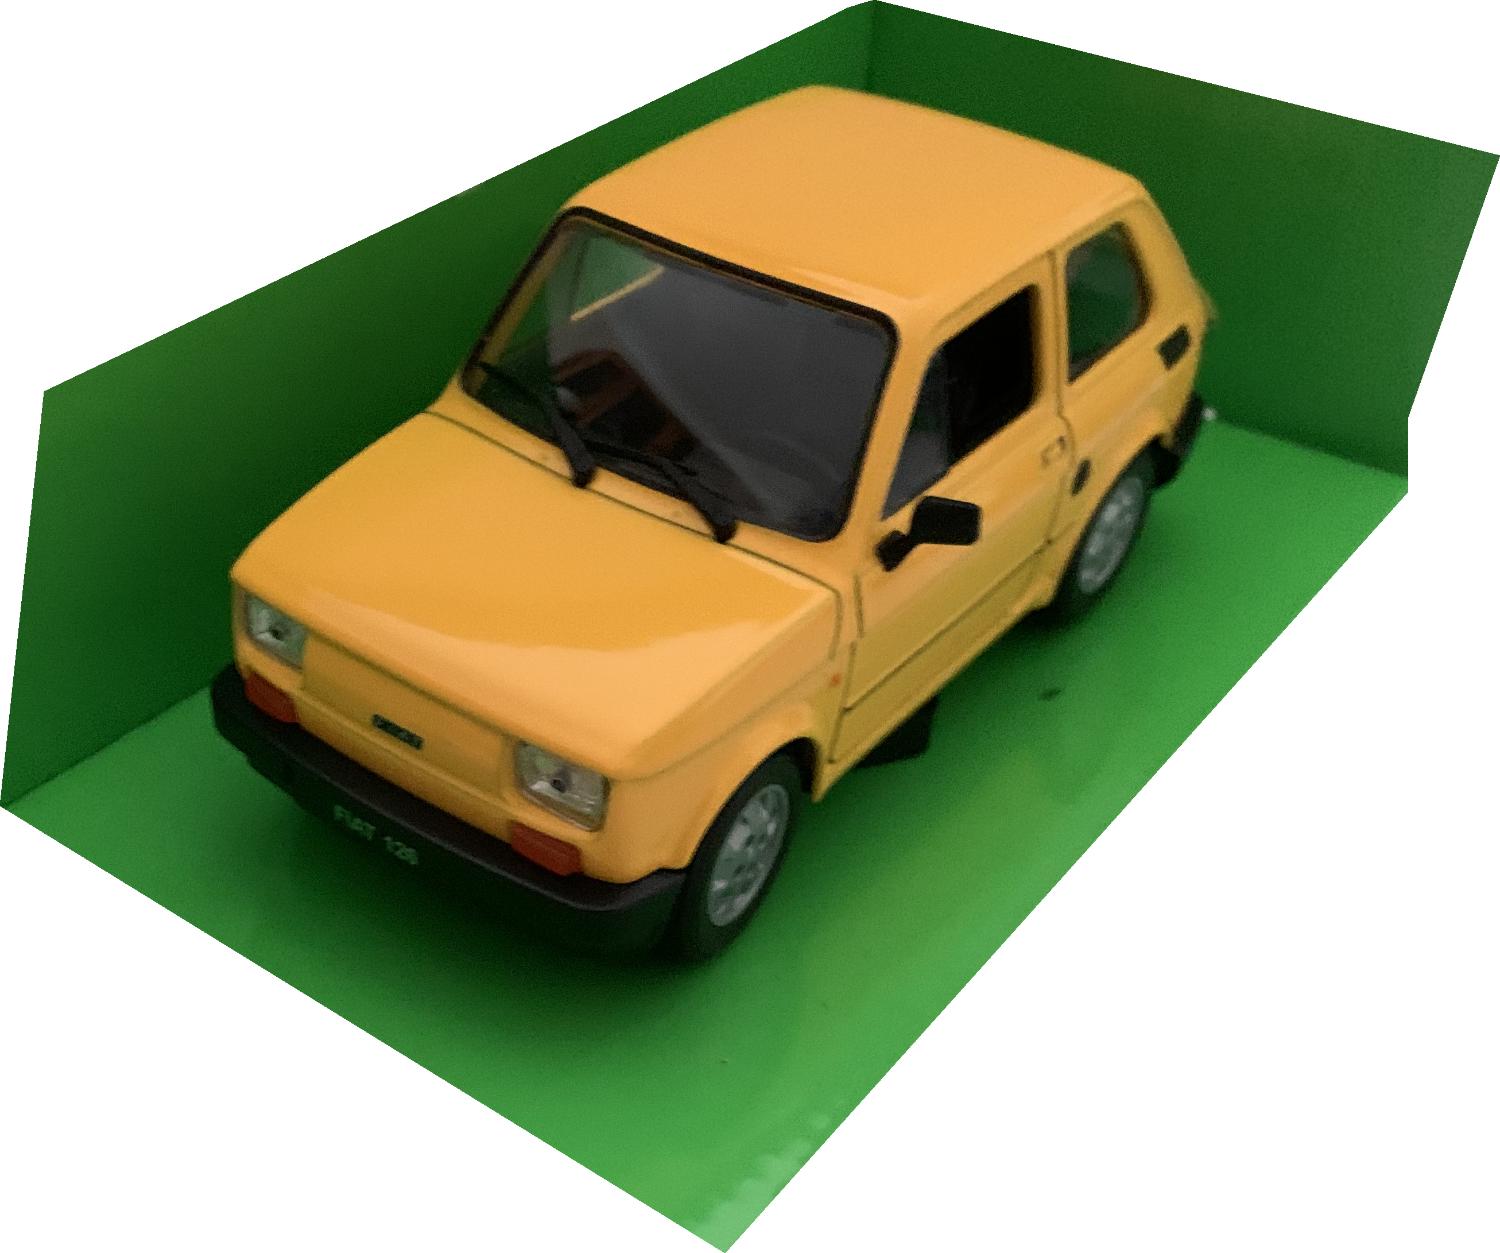 Fiat 126 in yellow 1:24 scale diecast model from Welly / NEX